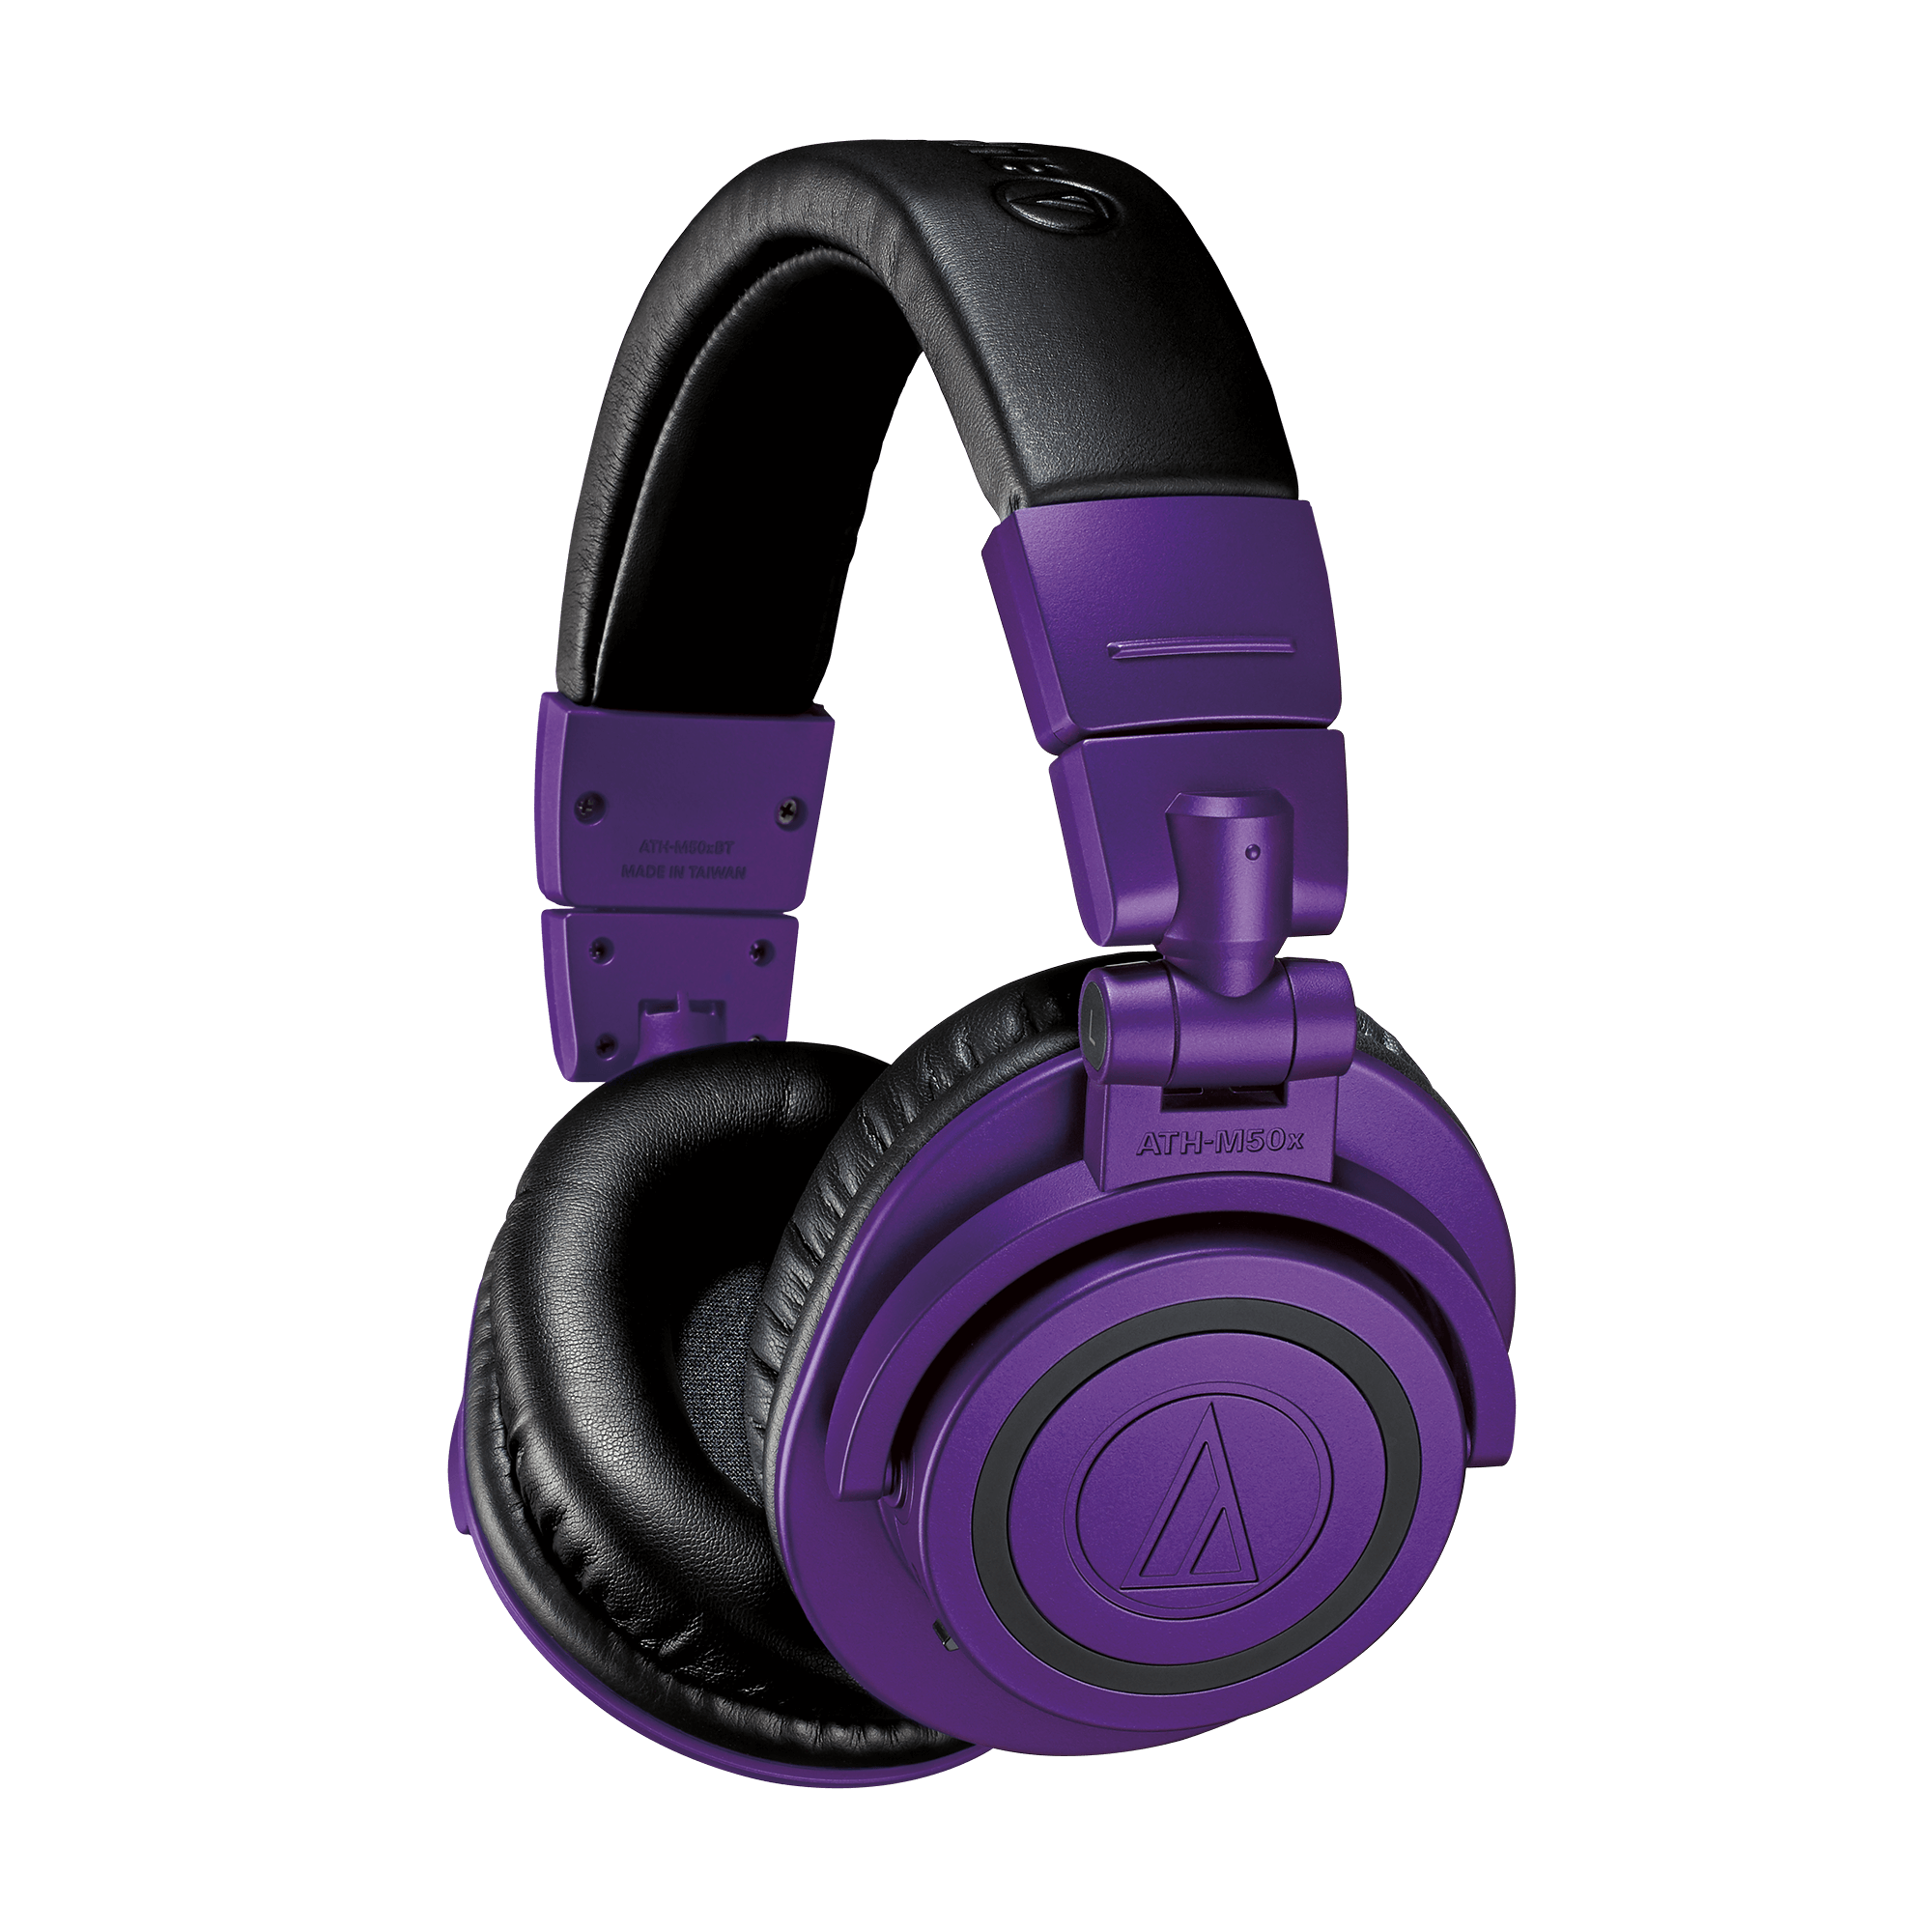 Audio-Technica ATH-M50xBT2 Wired+Wireless Bluetooth Over-Ear Headphones  FREESHIP 4961310156183